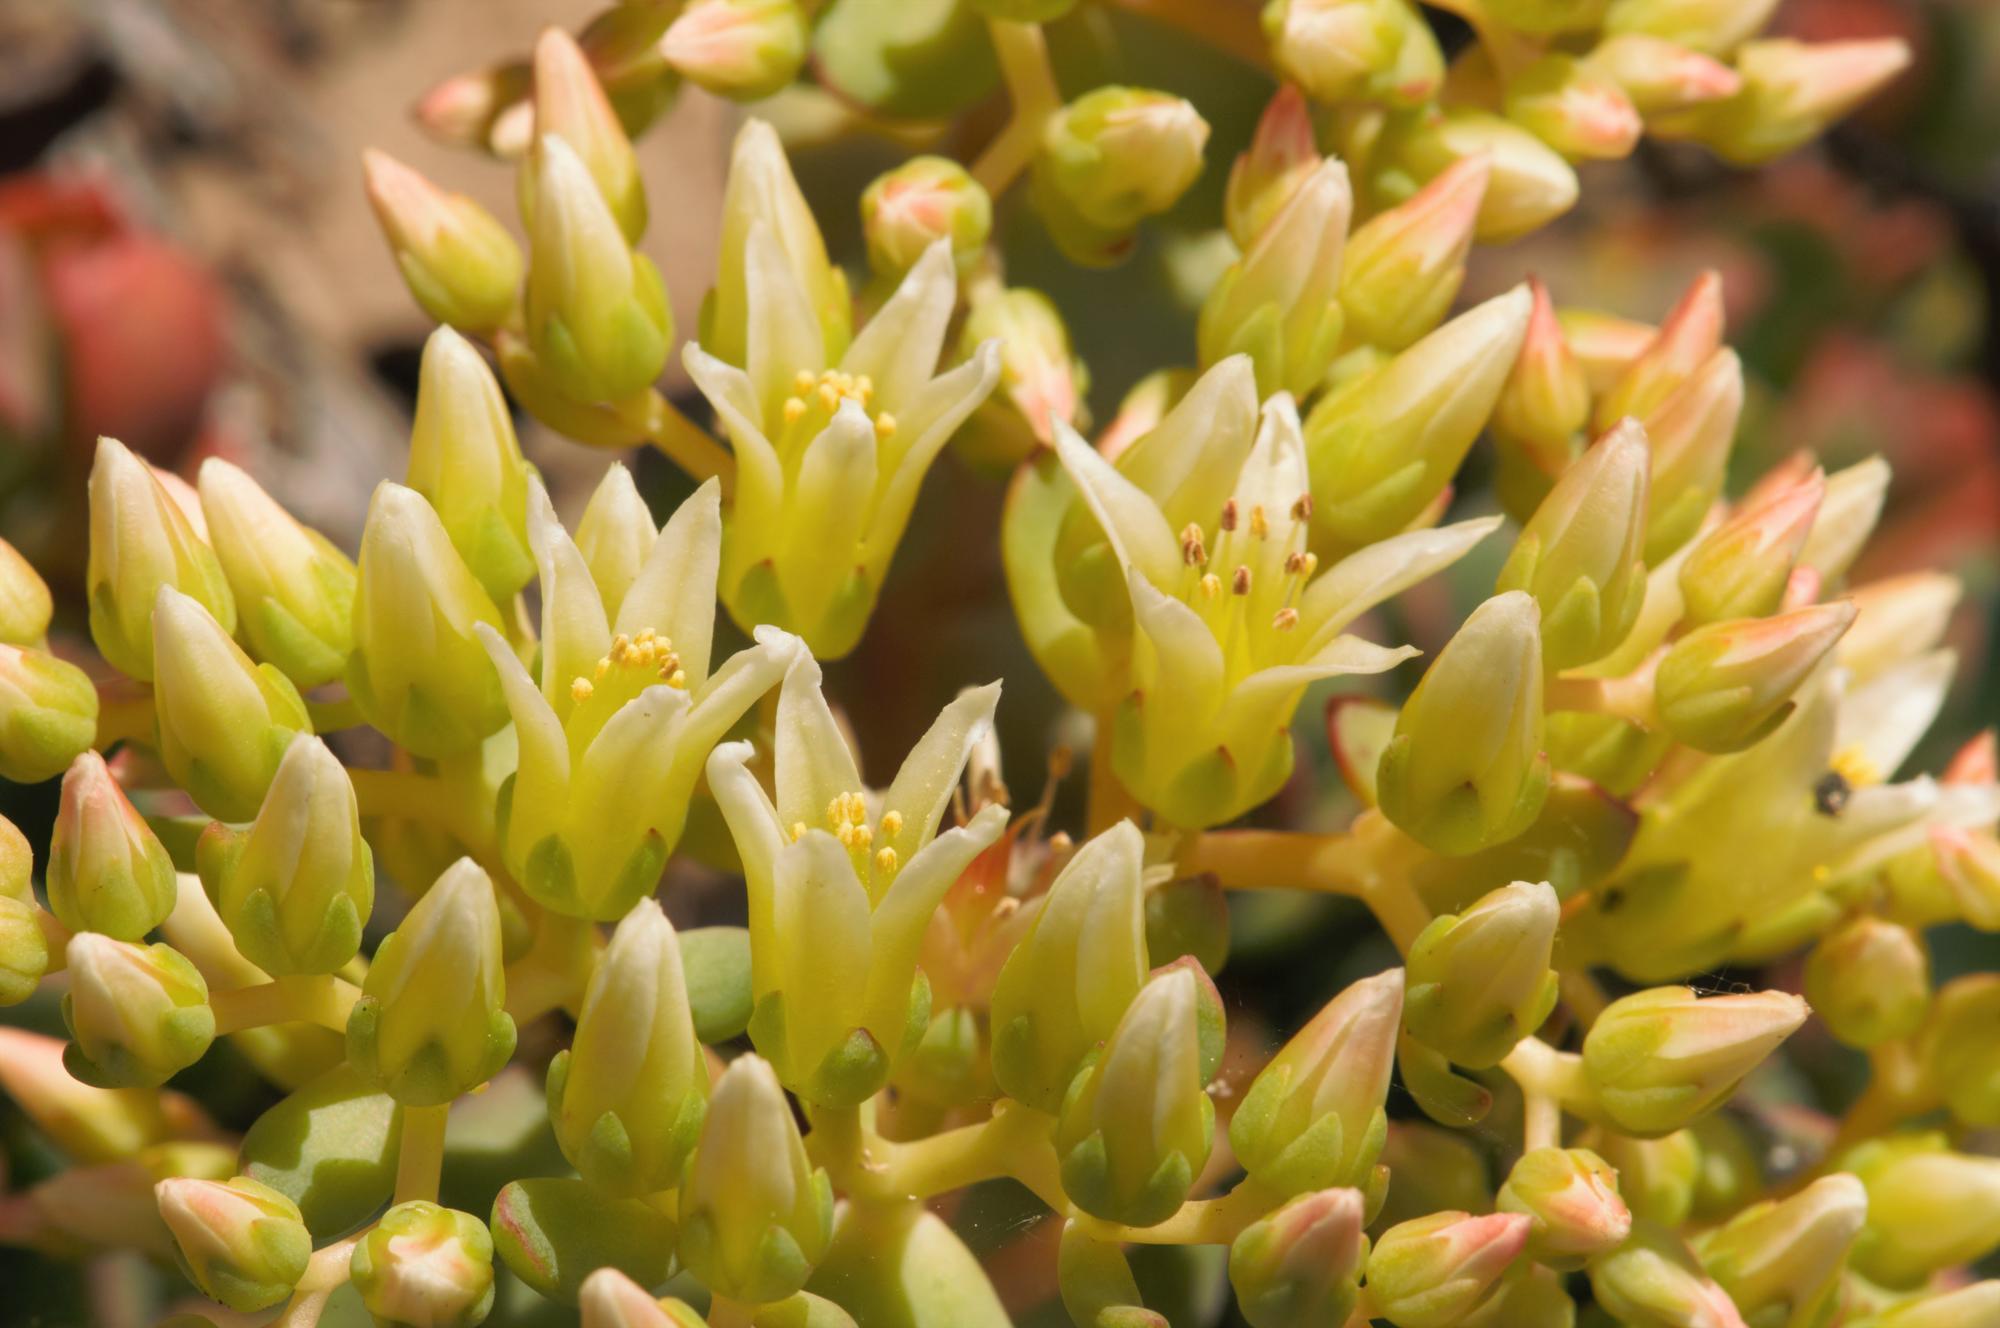 A close-up view of native stonecrop, a plant that provides sustenance for the small stonecrop mason bee.